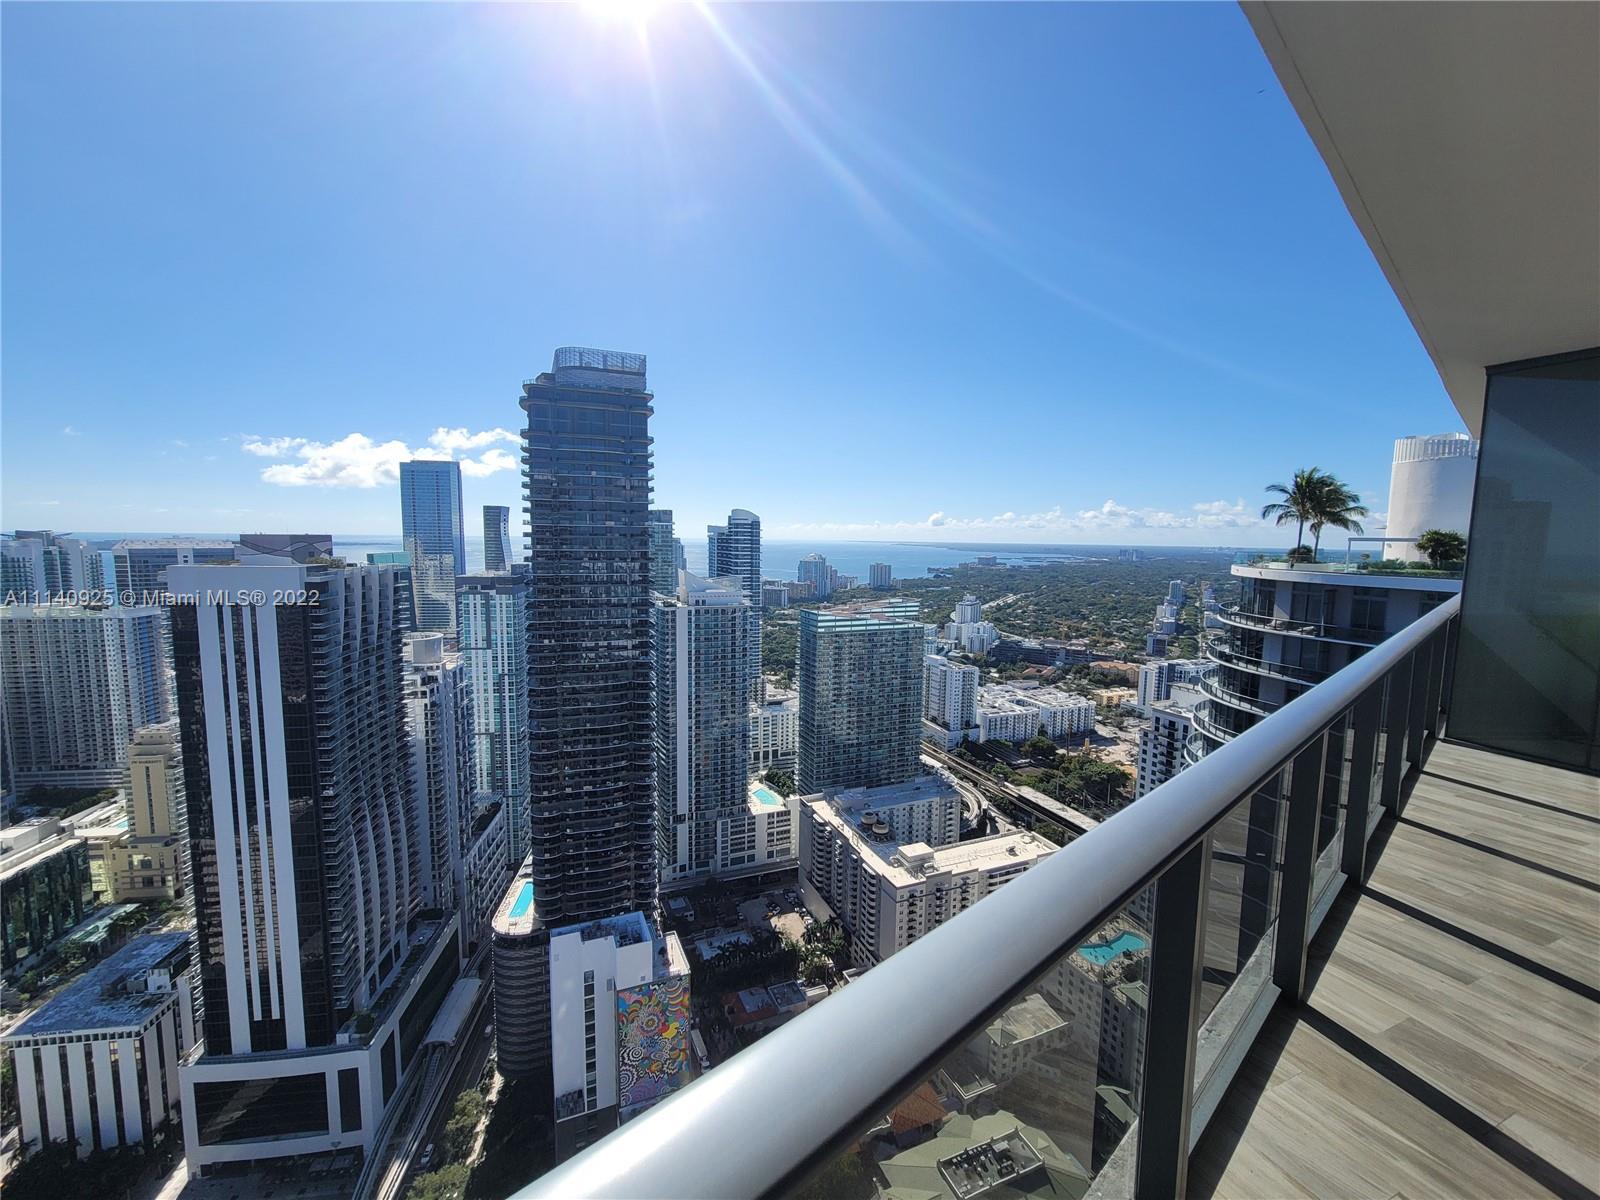 Own in one of the newest building in Brickell with Private Elevators! This 1 bedroom 2 bath residence offers top of the line appliances, finished closet, shades in the living areas plus enjoy hotel services. Full service pool level with food and beverage service, spa, high performance fitness centers, amenities lounge designed by Yabu Pushelberg, game lounge, 45th floor library and lounge, plus a Residents only roof top pool with spectacular views of Biscayne Bay, South Beach & Miami. Enjoy the best Brickell has to offer living the best building in Brickell. Centrally located. Easy to Preview. Call L/A